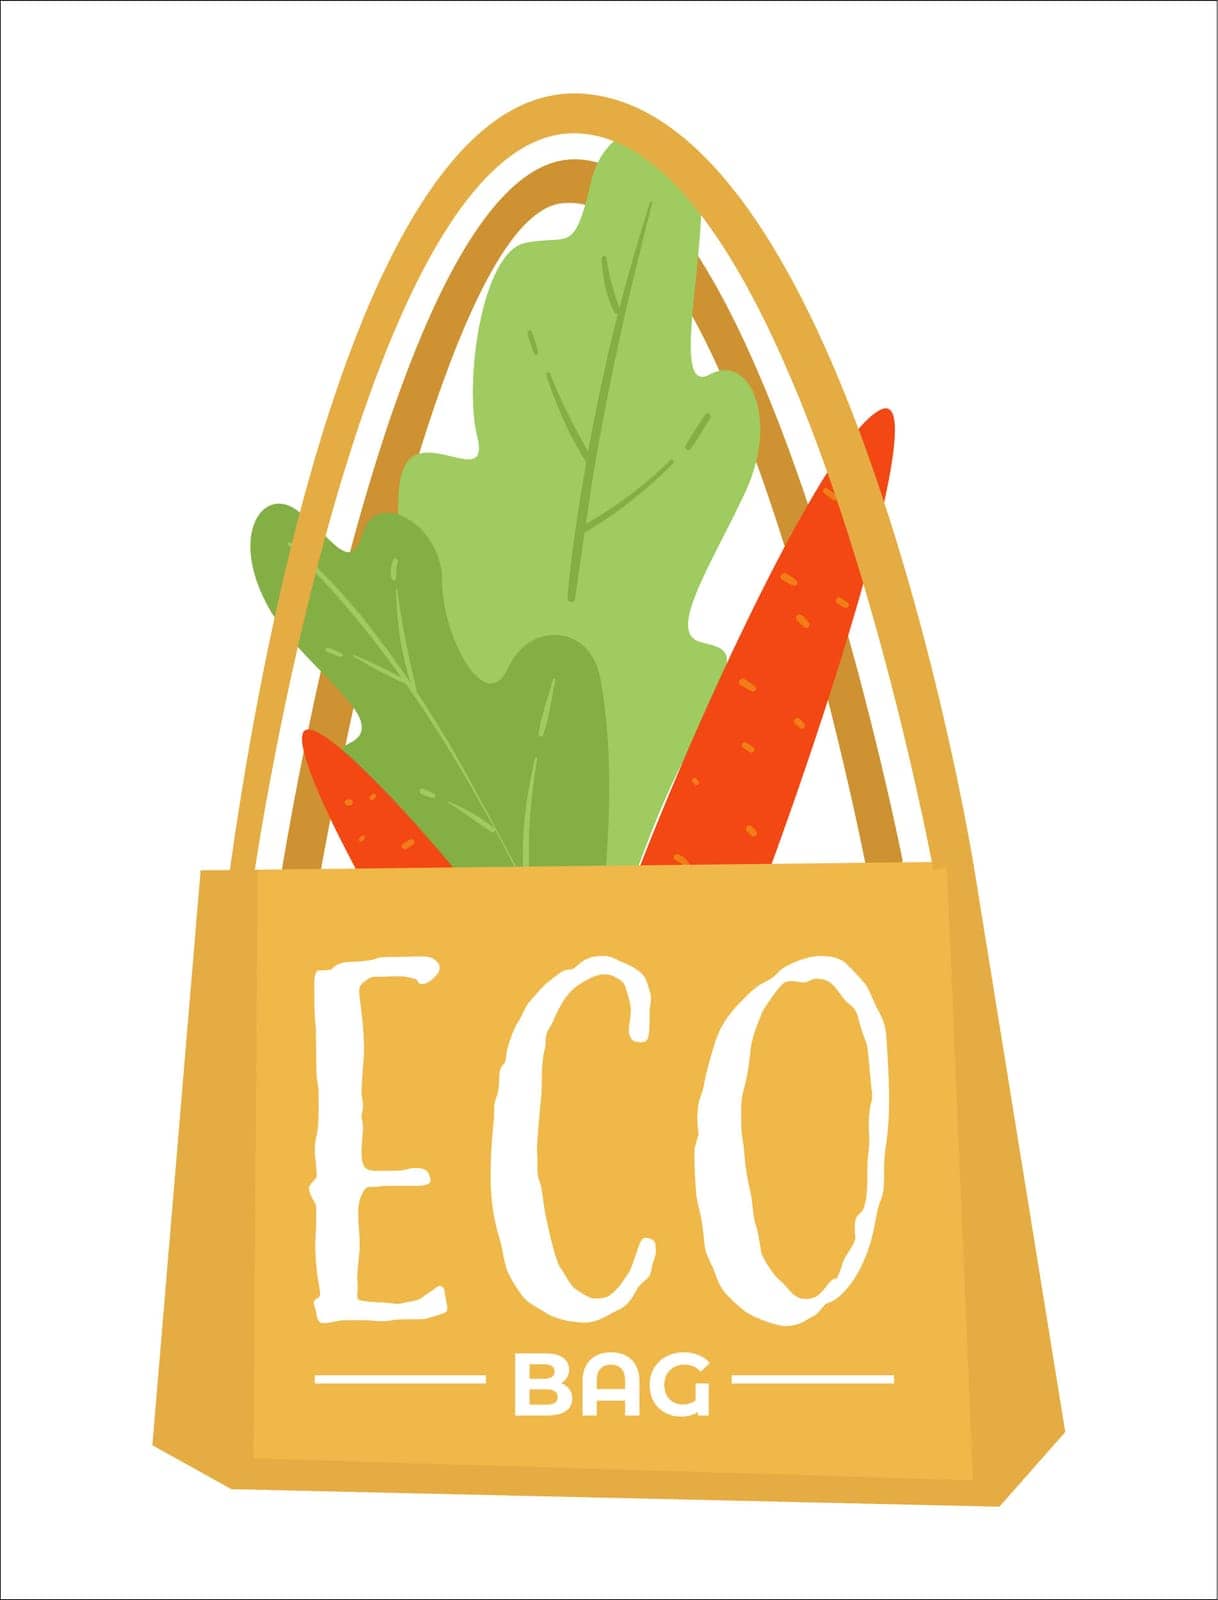 Ecologically friendly bag for products and shopping, isolated icon of canvas tote filled with carrots and leaves. Handbag accessory with handles, environment care zero waste, vector in flat style